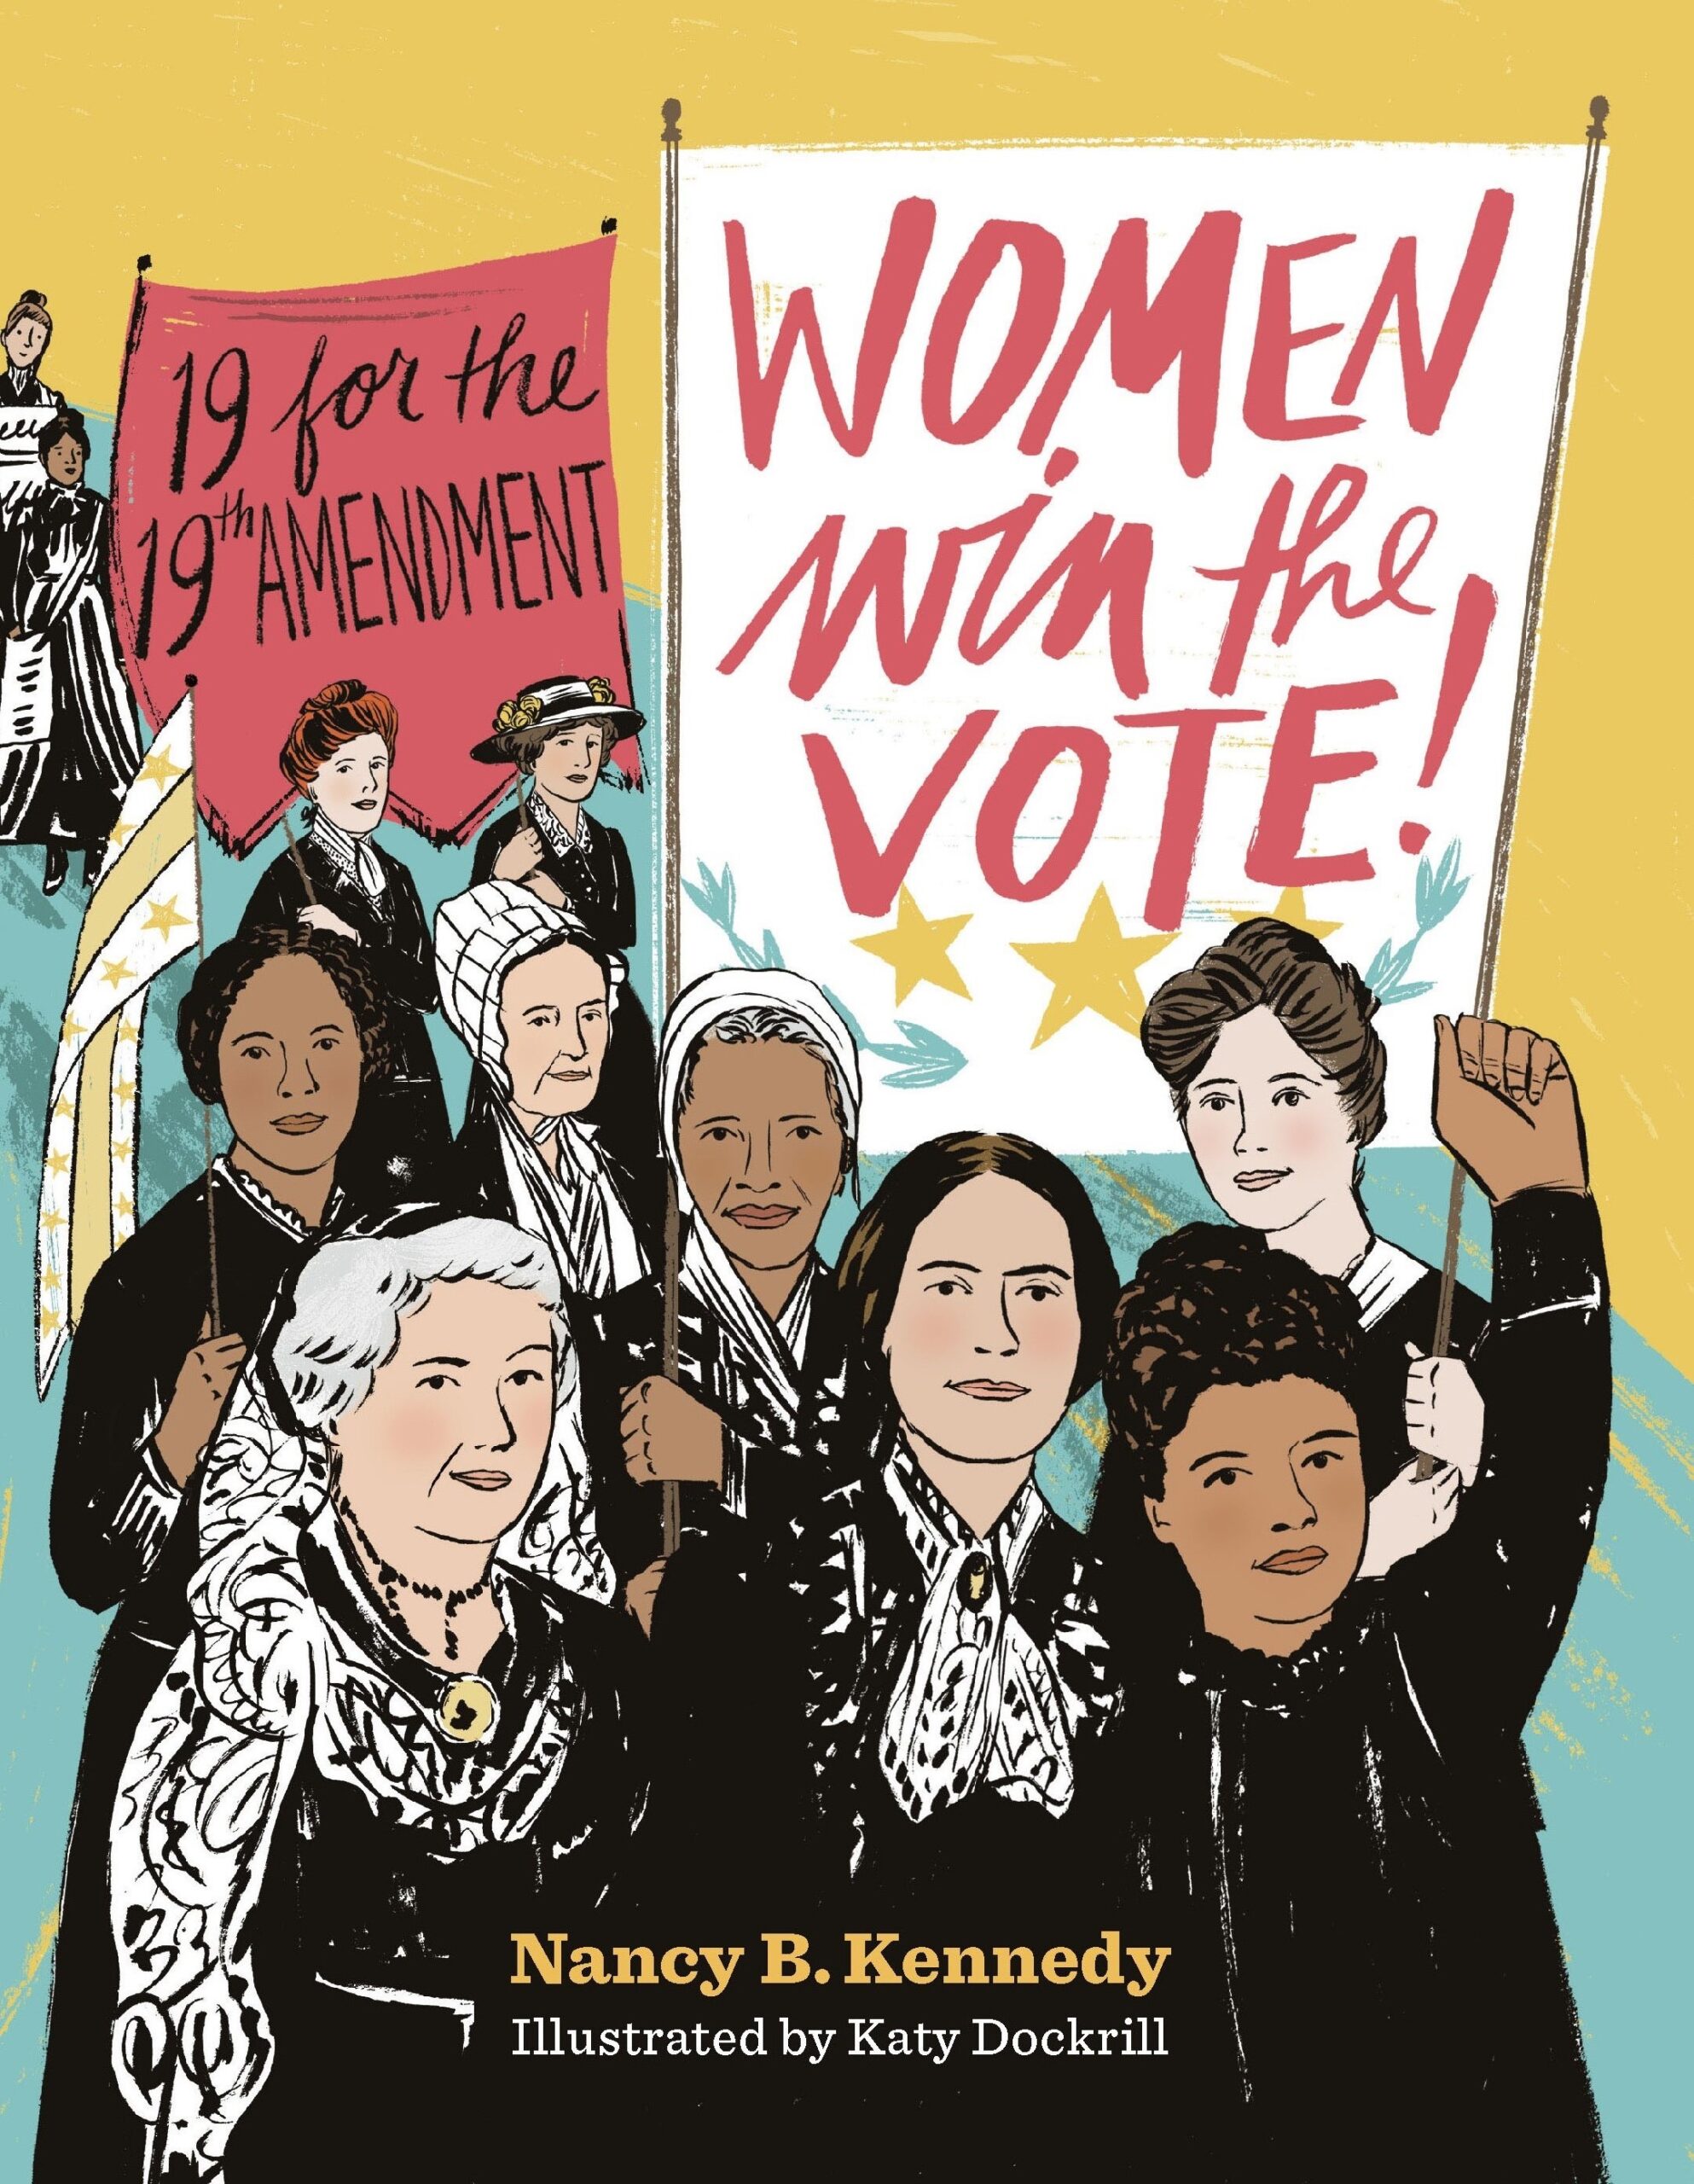 Women Win The Vote! A Talk with Nancy B. Kennedy at The Morristown and Morris Township Library